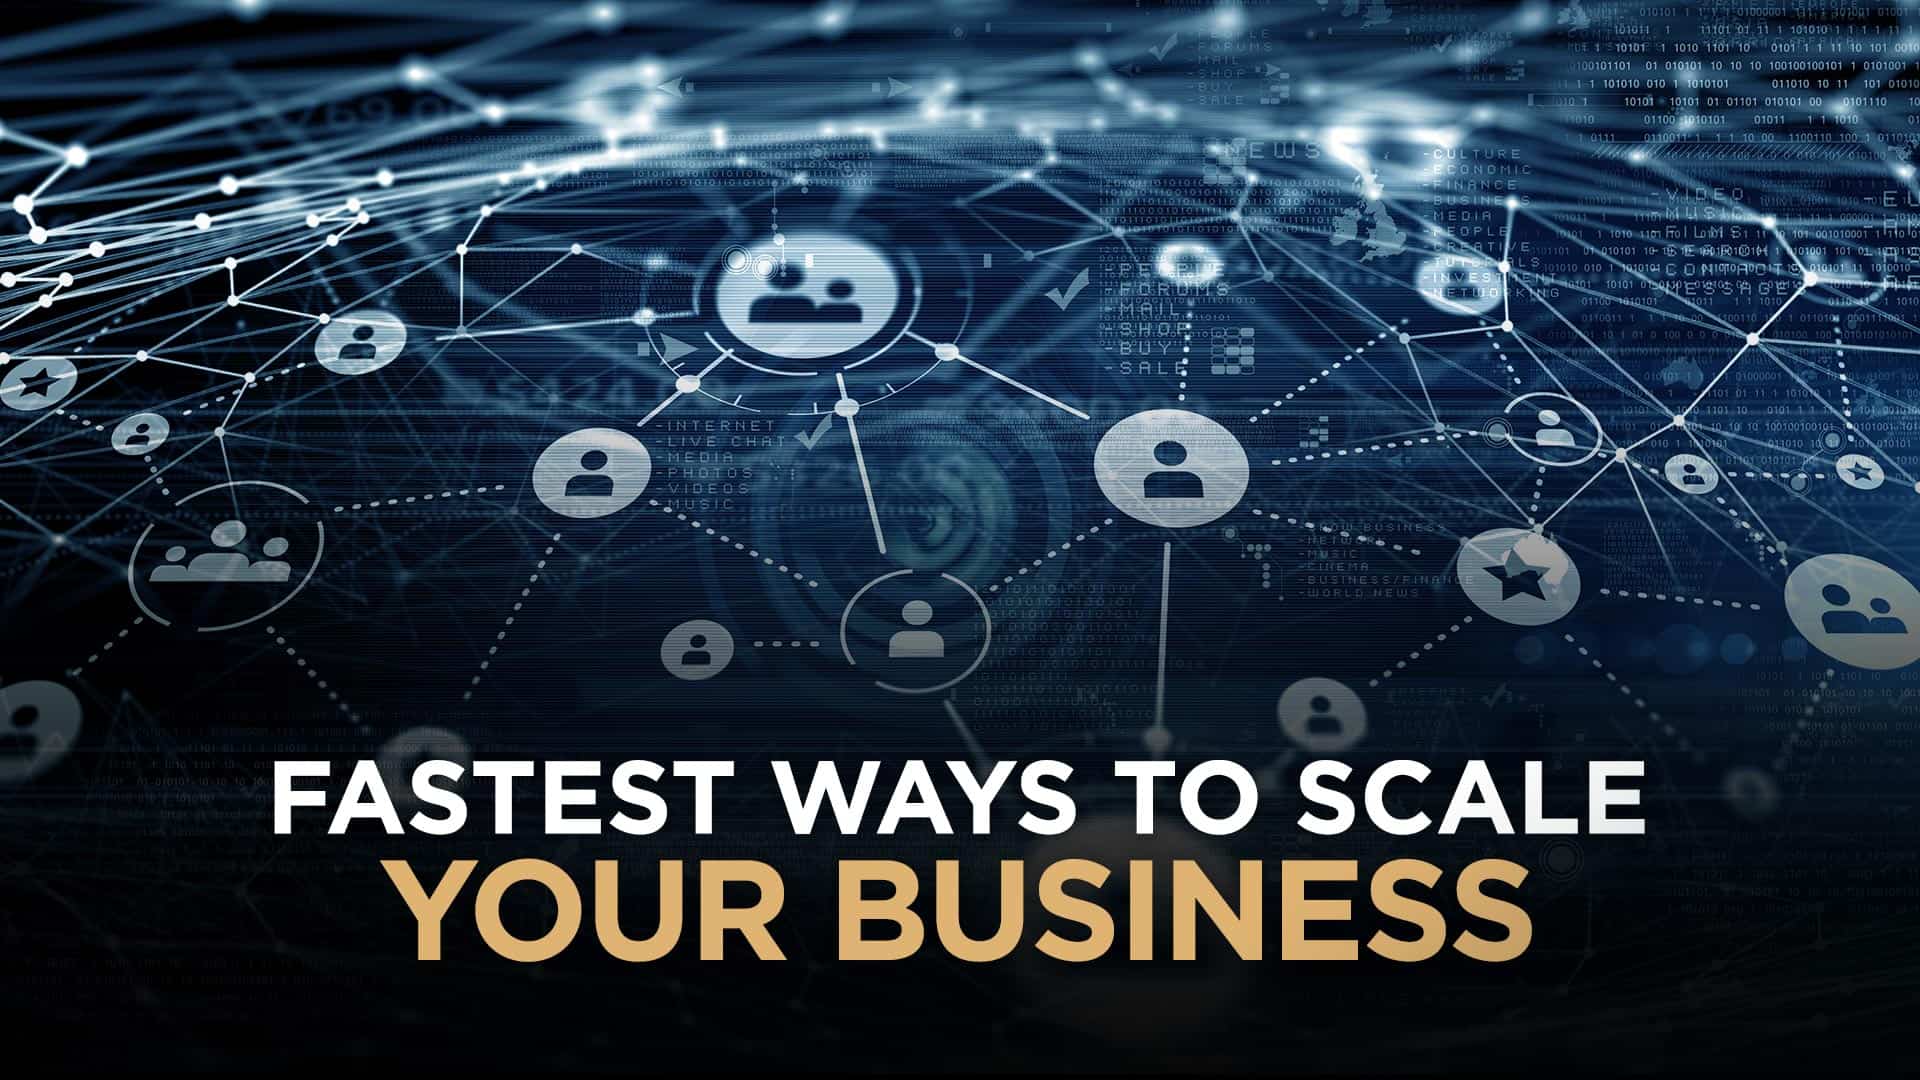 scale your business in 7 steps fast